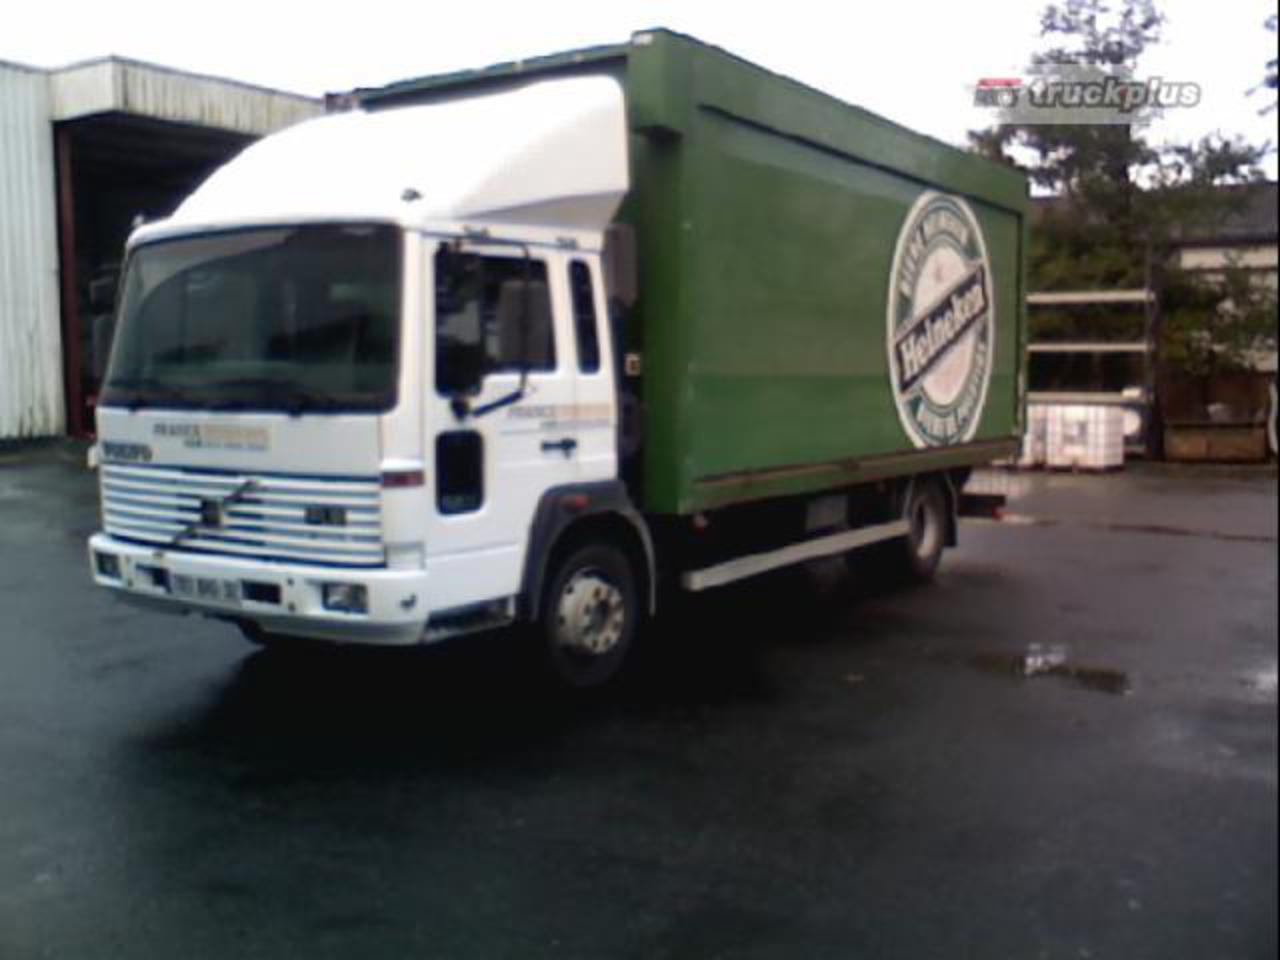 Volvo FL612 4X2. View Download Wallpaper. 640x480. Comments